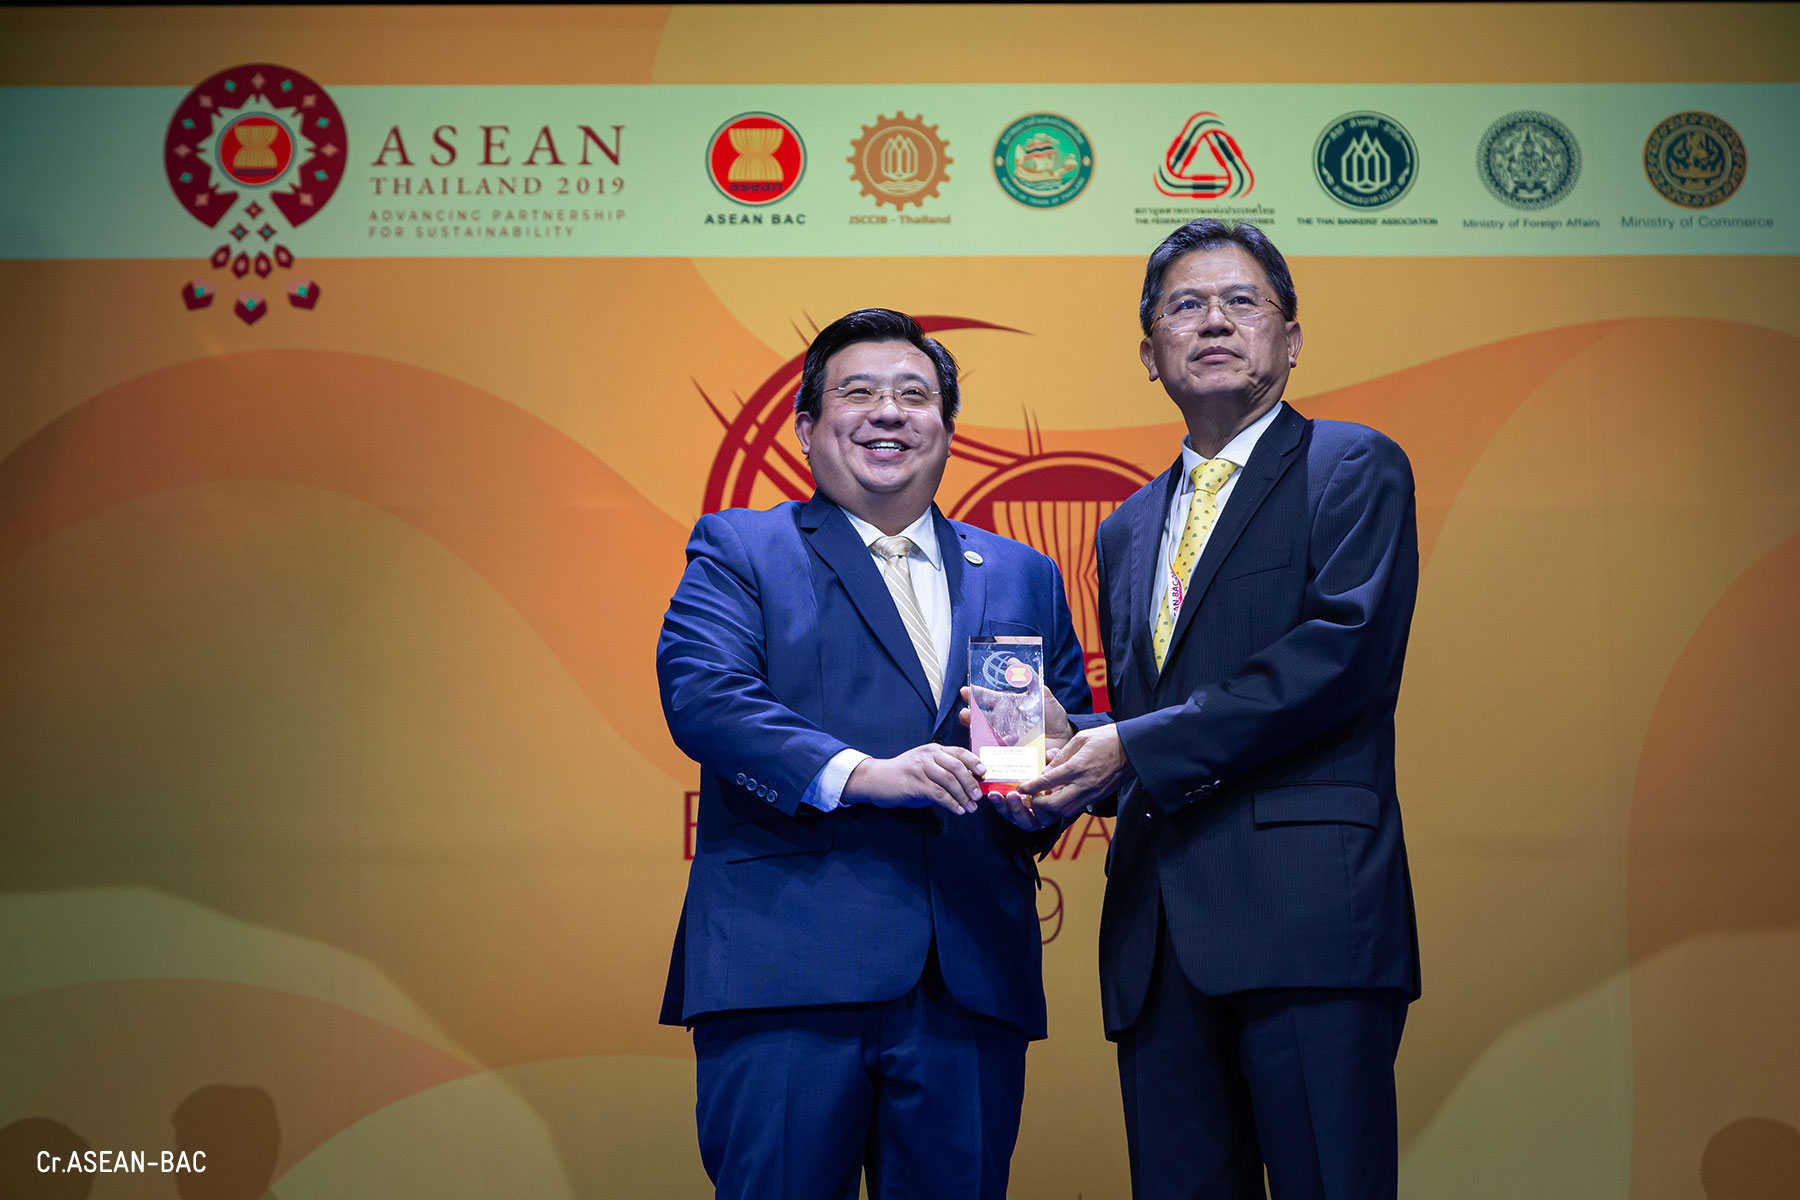 Shalom receiving the trophy Gideon Lam, CEO of Shalom International Movers and Mr. Predee Daochai, Chairman of the Thai Bankers’ Association